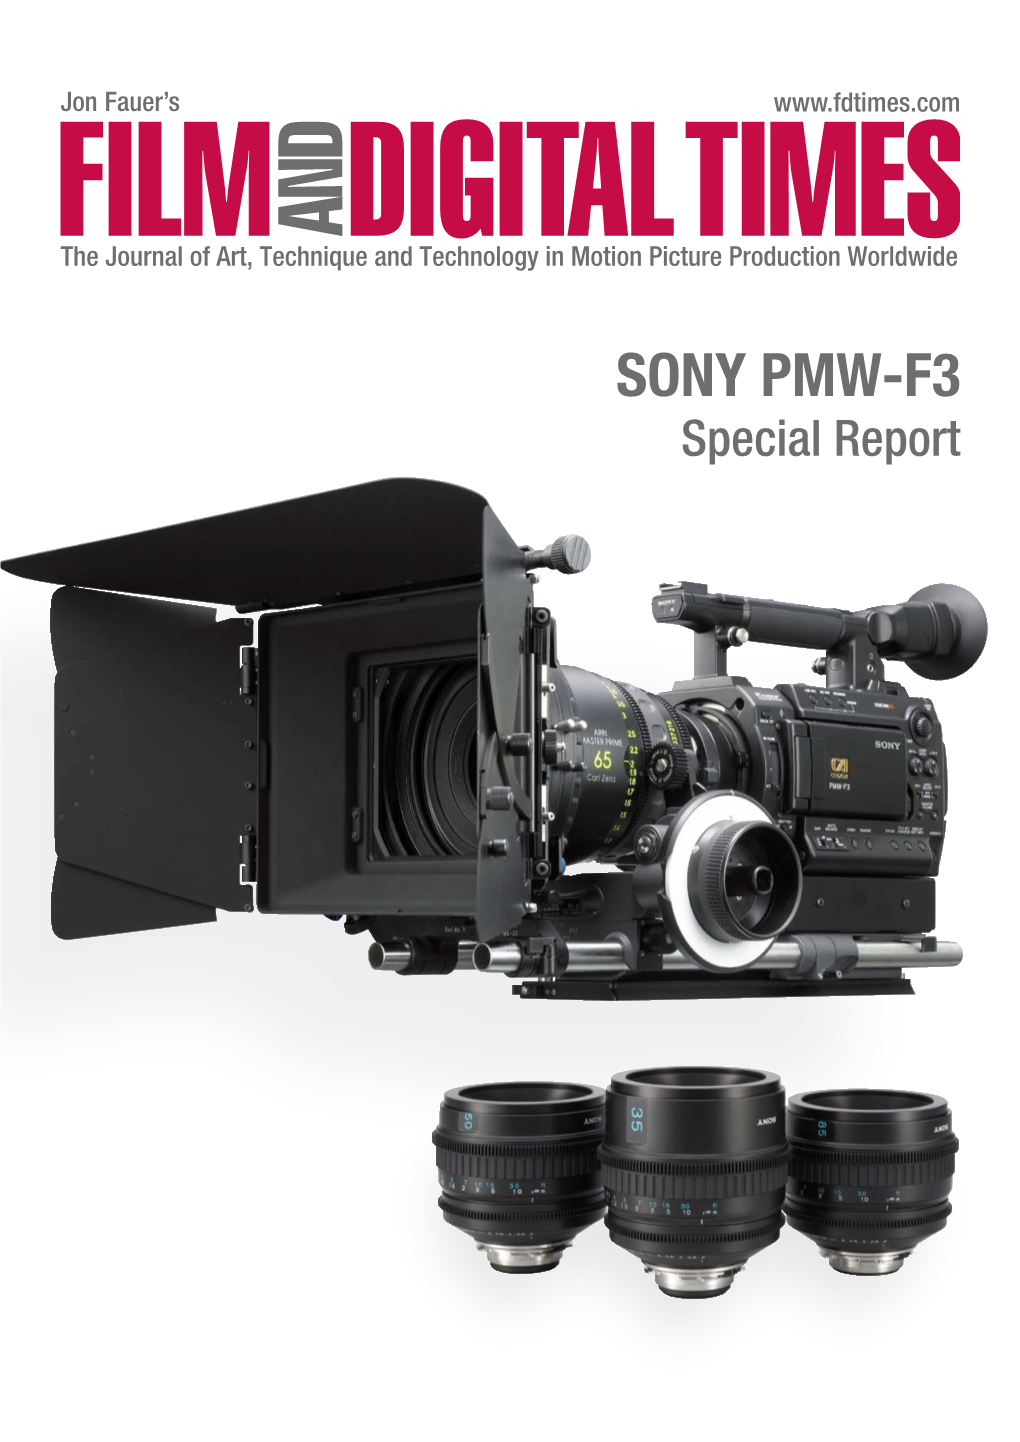 SONY PMW-F3 Special Report Sony Affordable 35